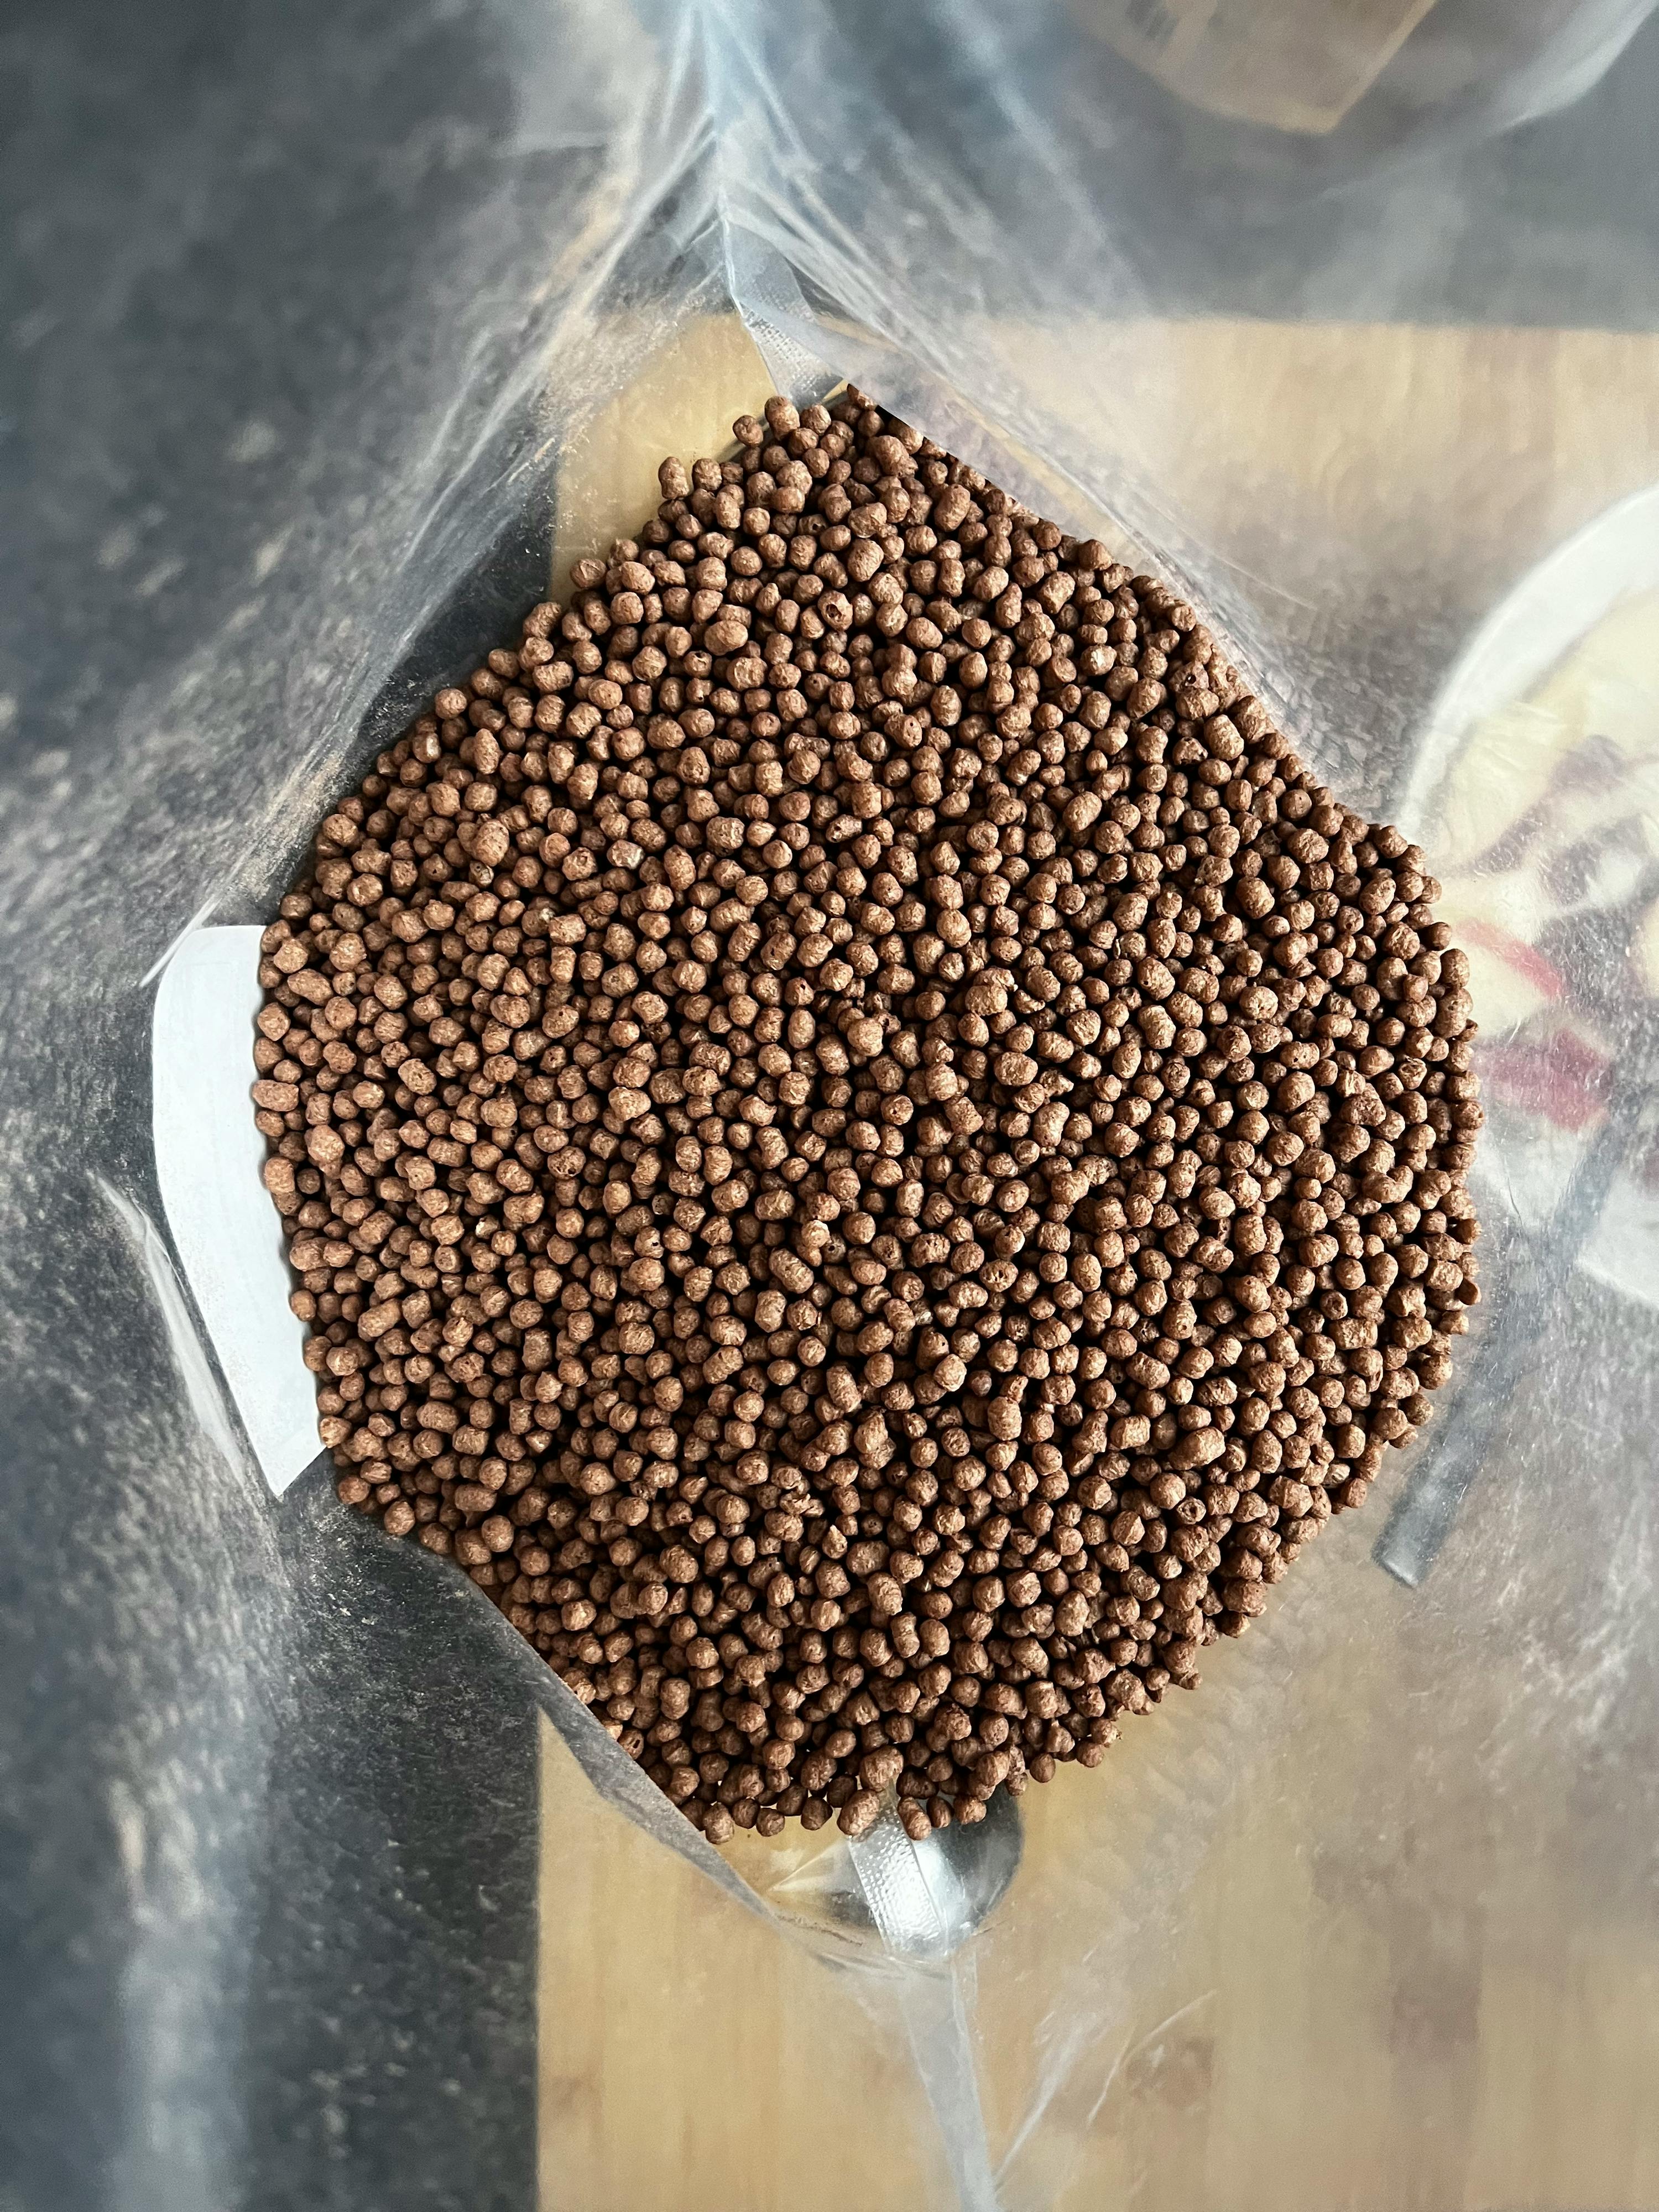 Private Label Soy Protein Crispies 58% with Cocoa at KoRo Source